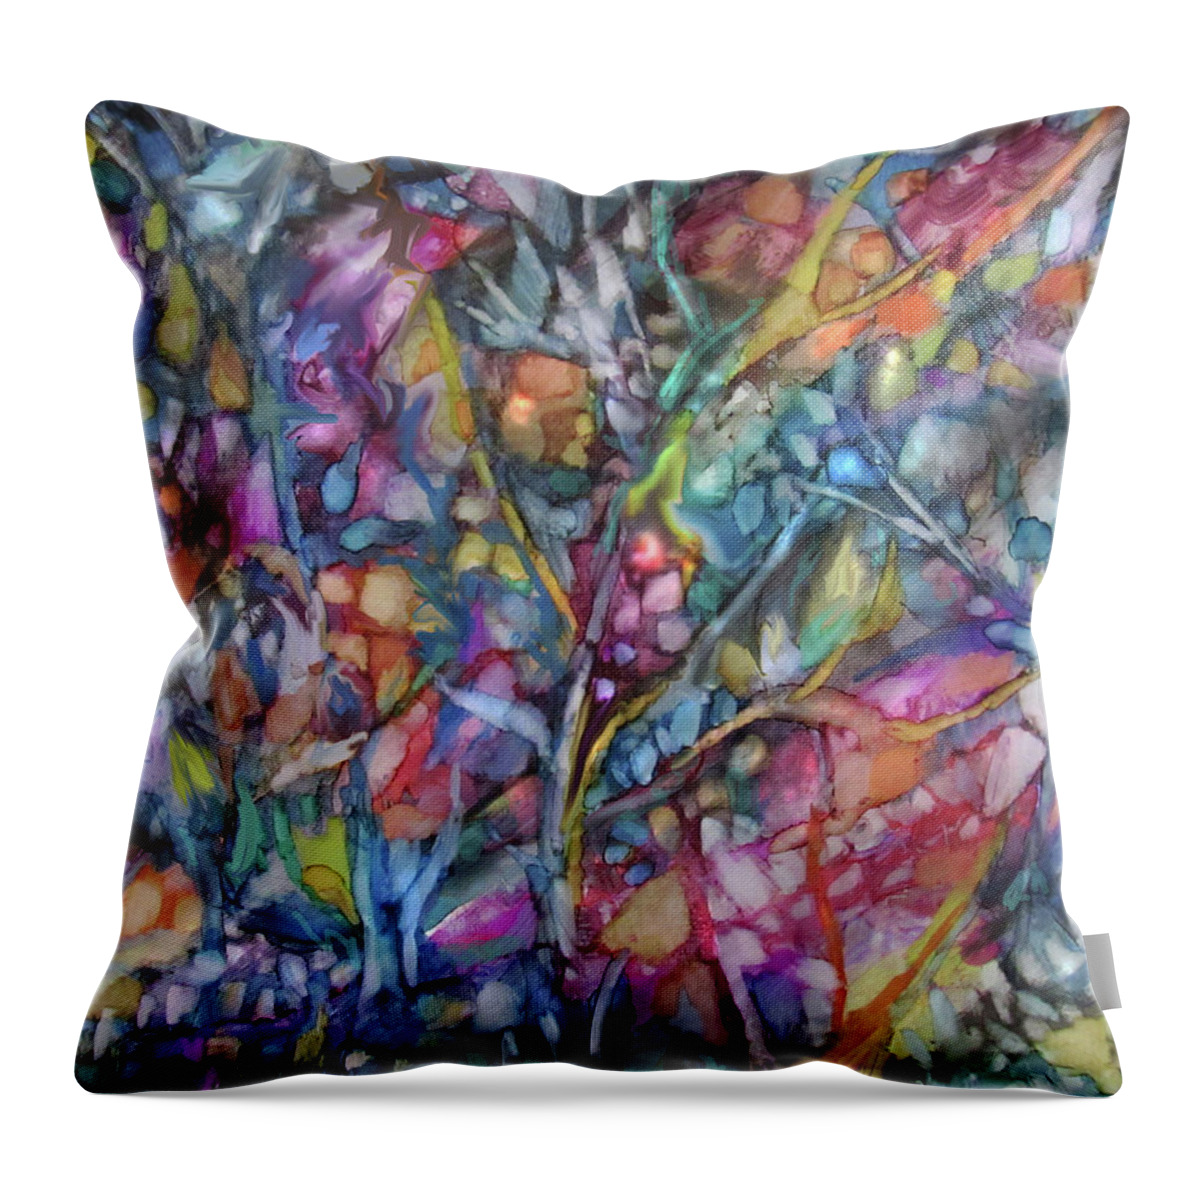 Alcohol Ink Throw Pillow featuring the painting Twilight Garden by Jean Batzell Fitzgerald